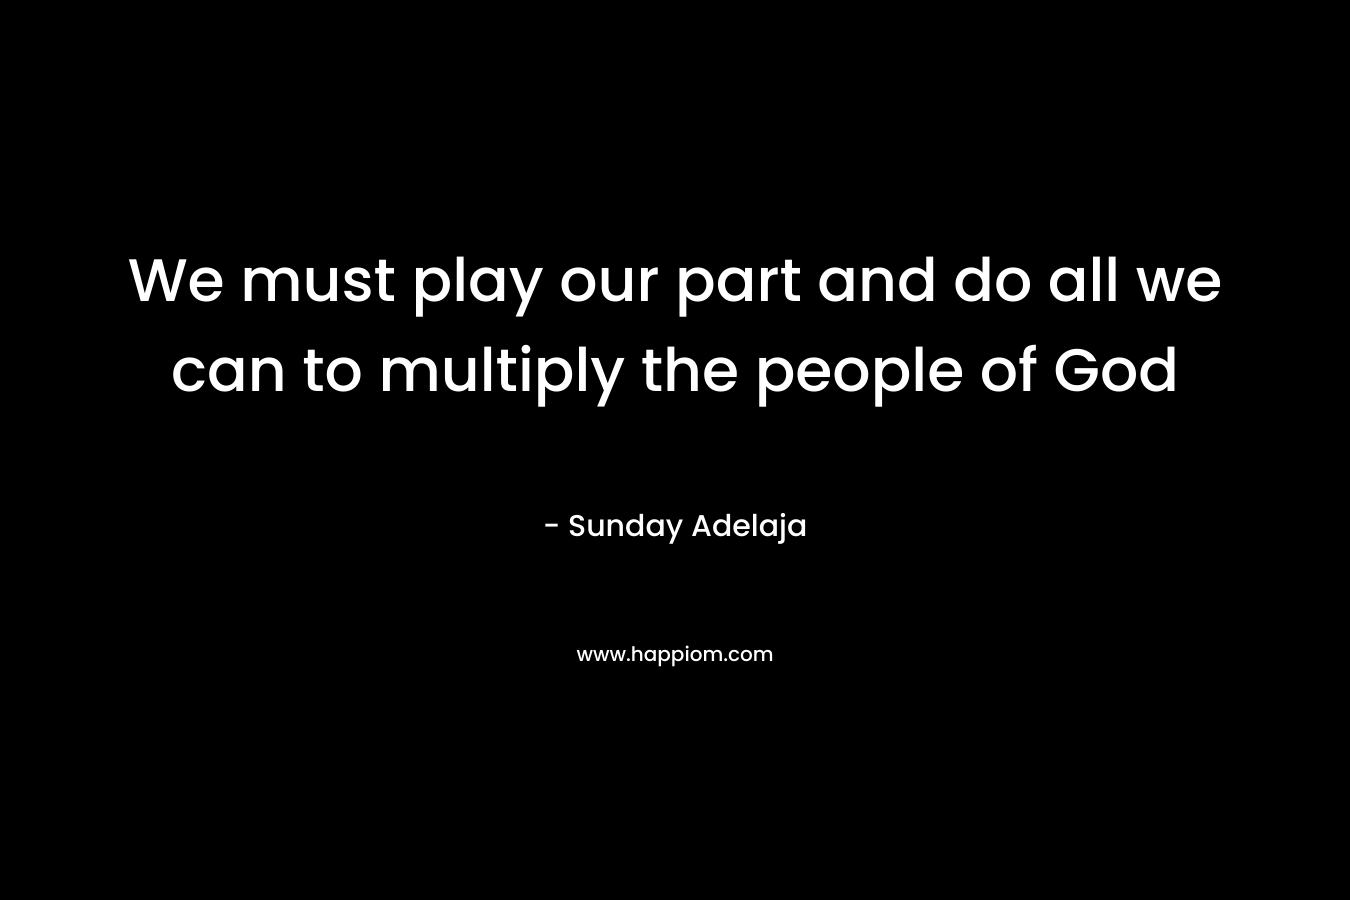 We must play our part and do all we can to multiply the people of God